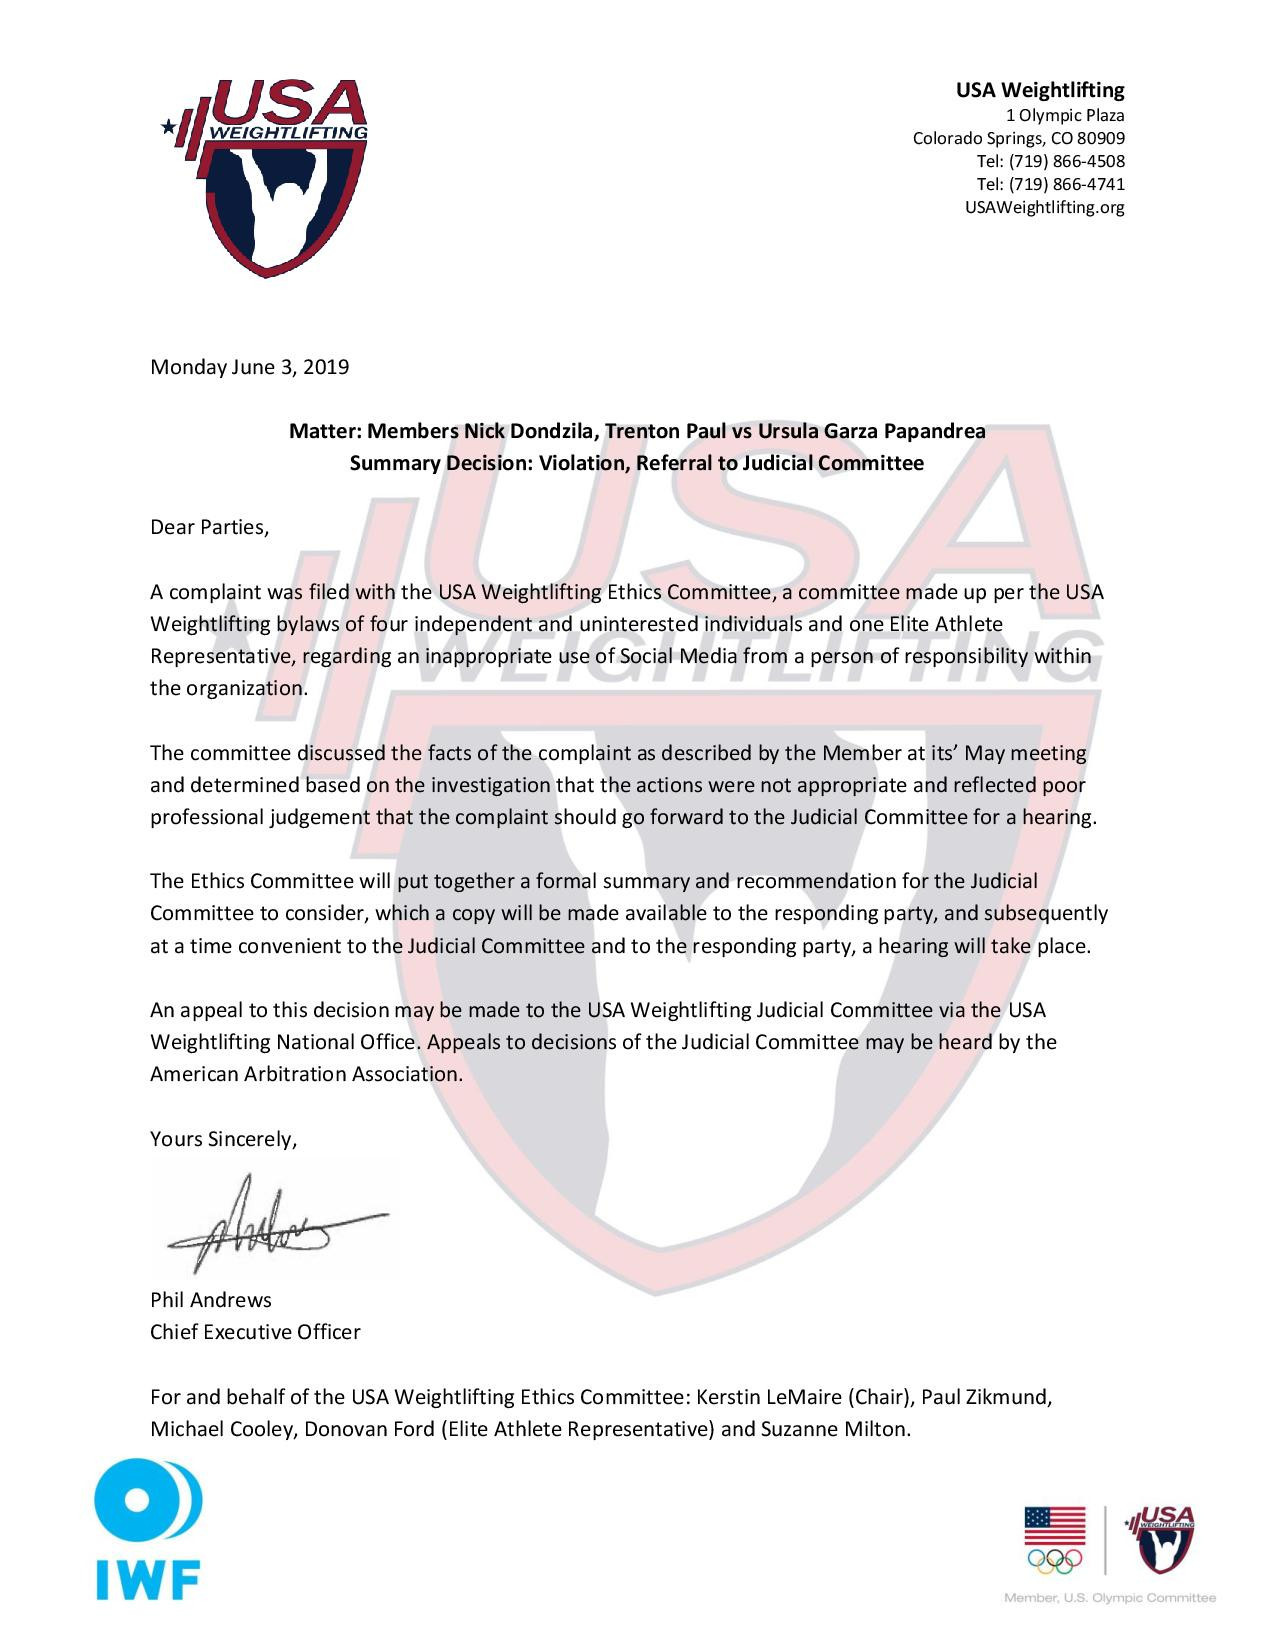 The letter sent by USA Weightlifting informing complainants of its Ethics Committee